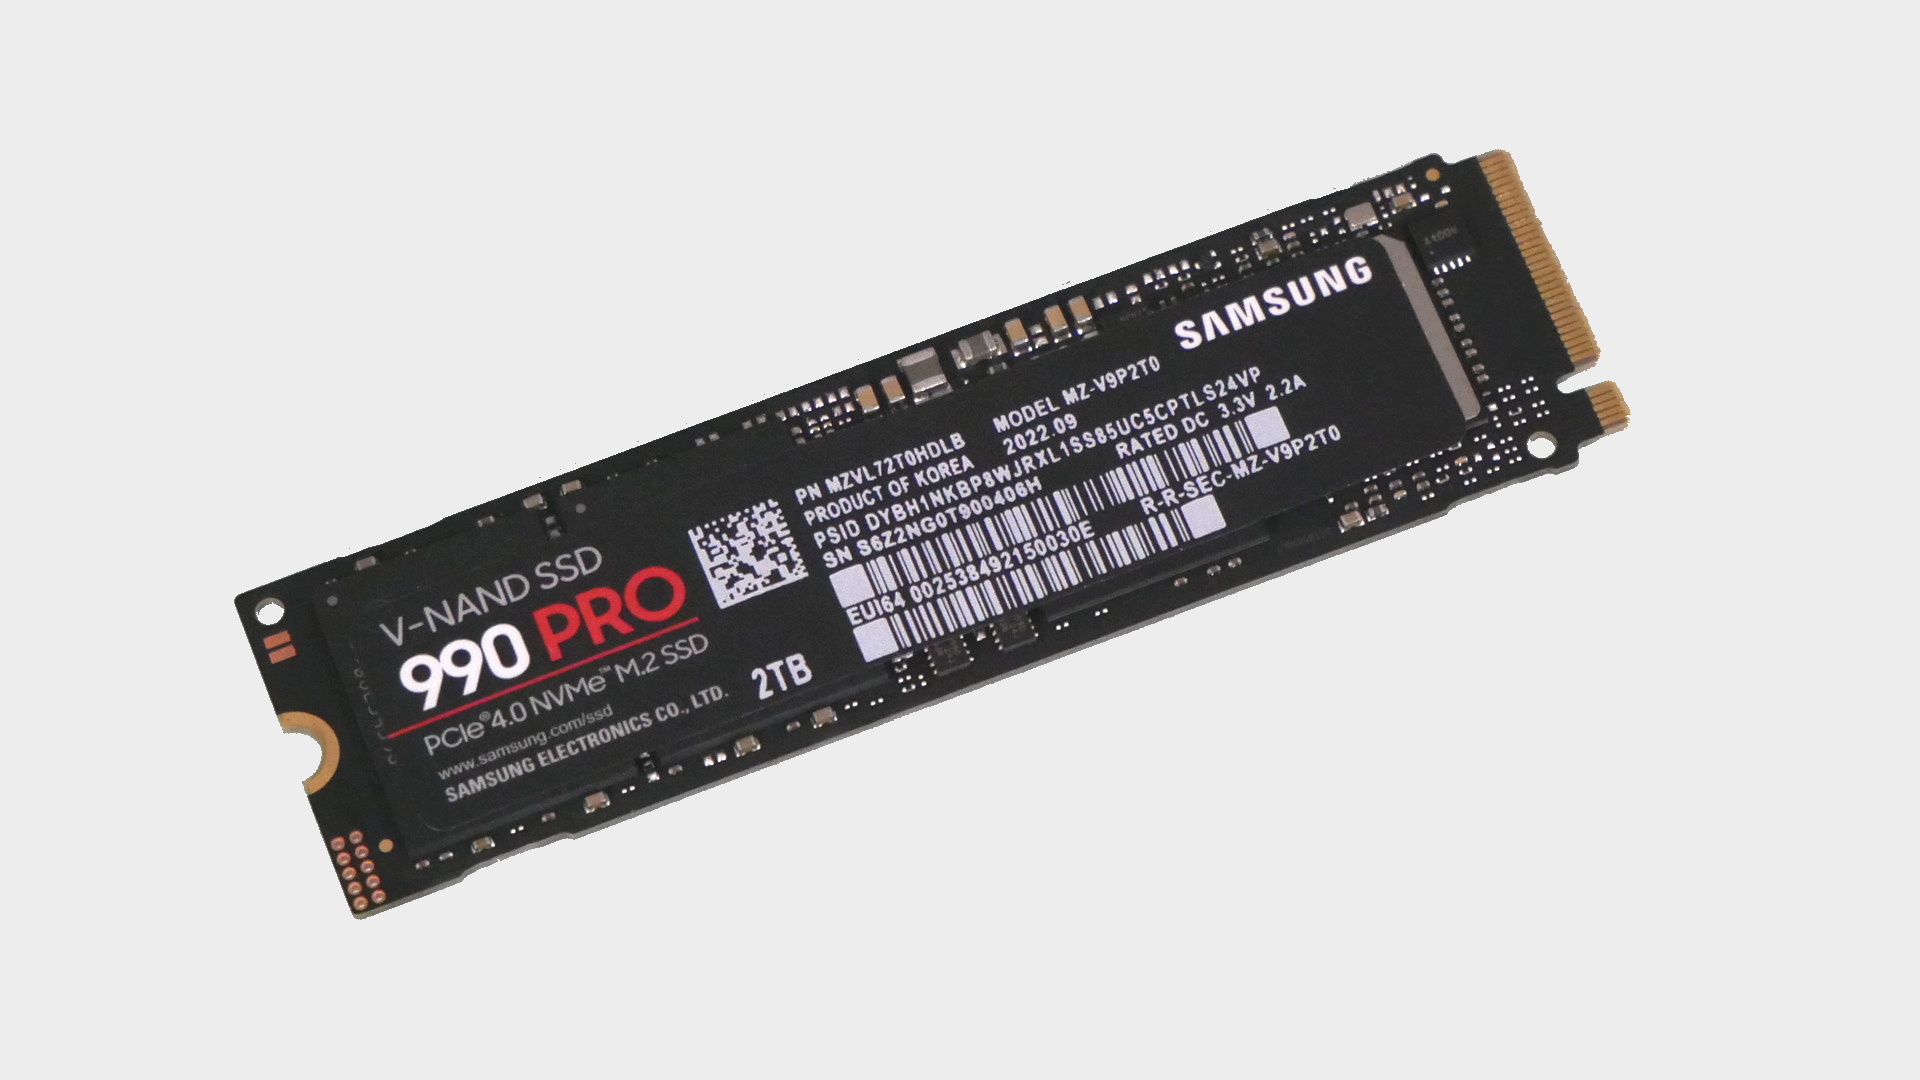  The damage has been done to Samsung's sickly 990 Pro SSDs despite the new firmware fix 